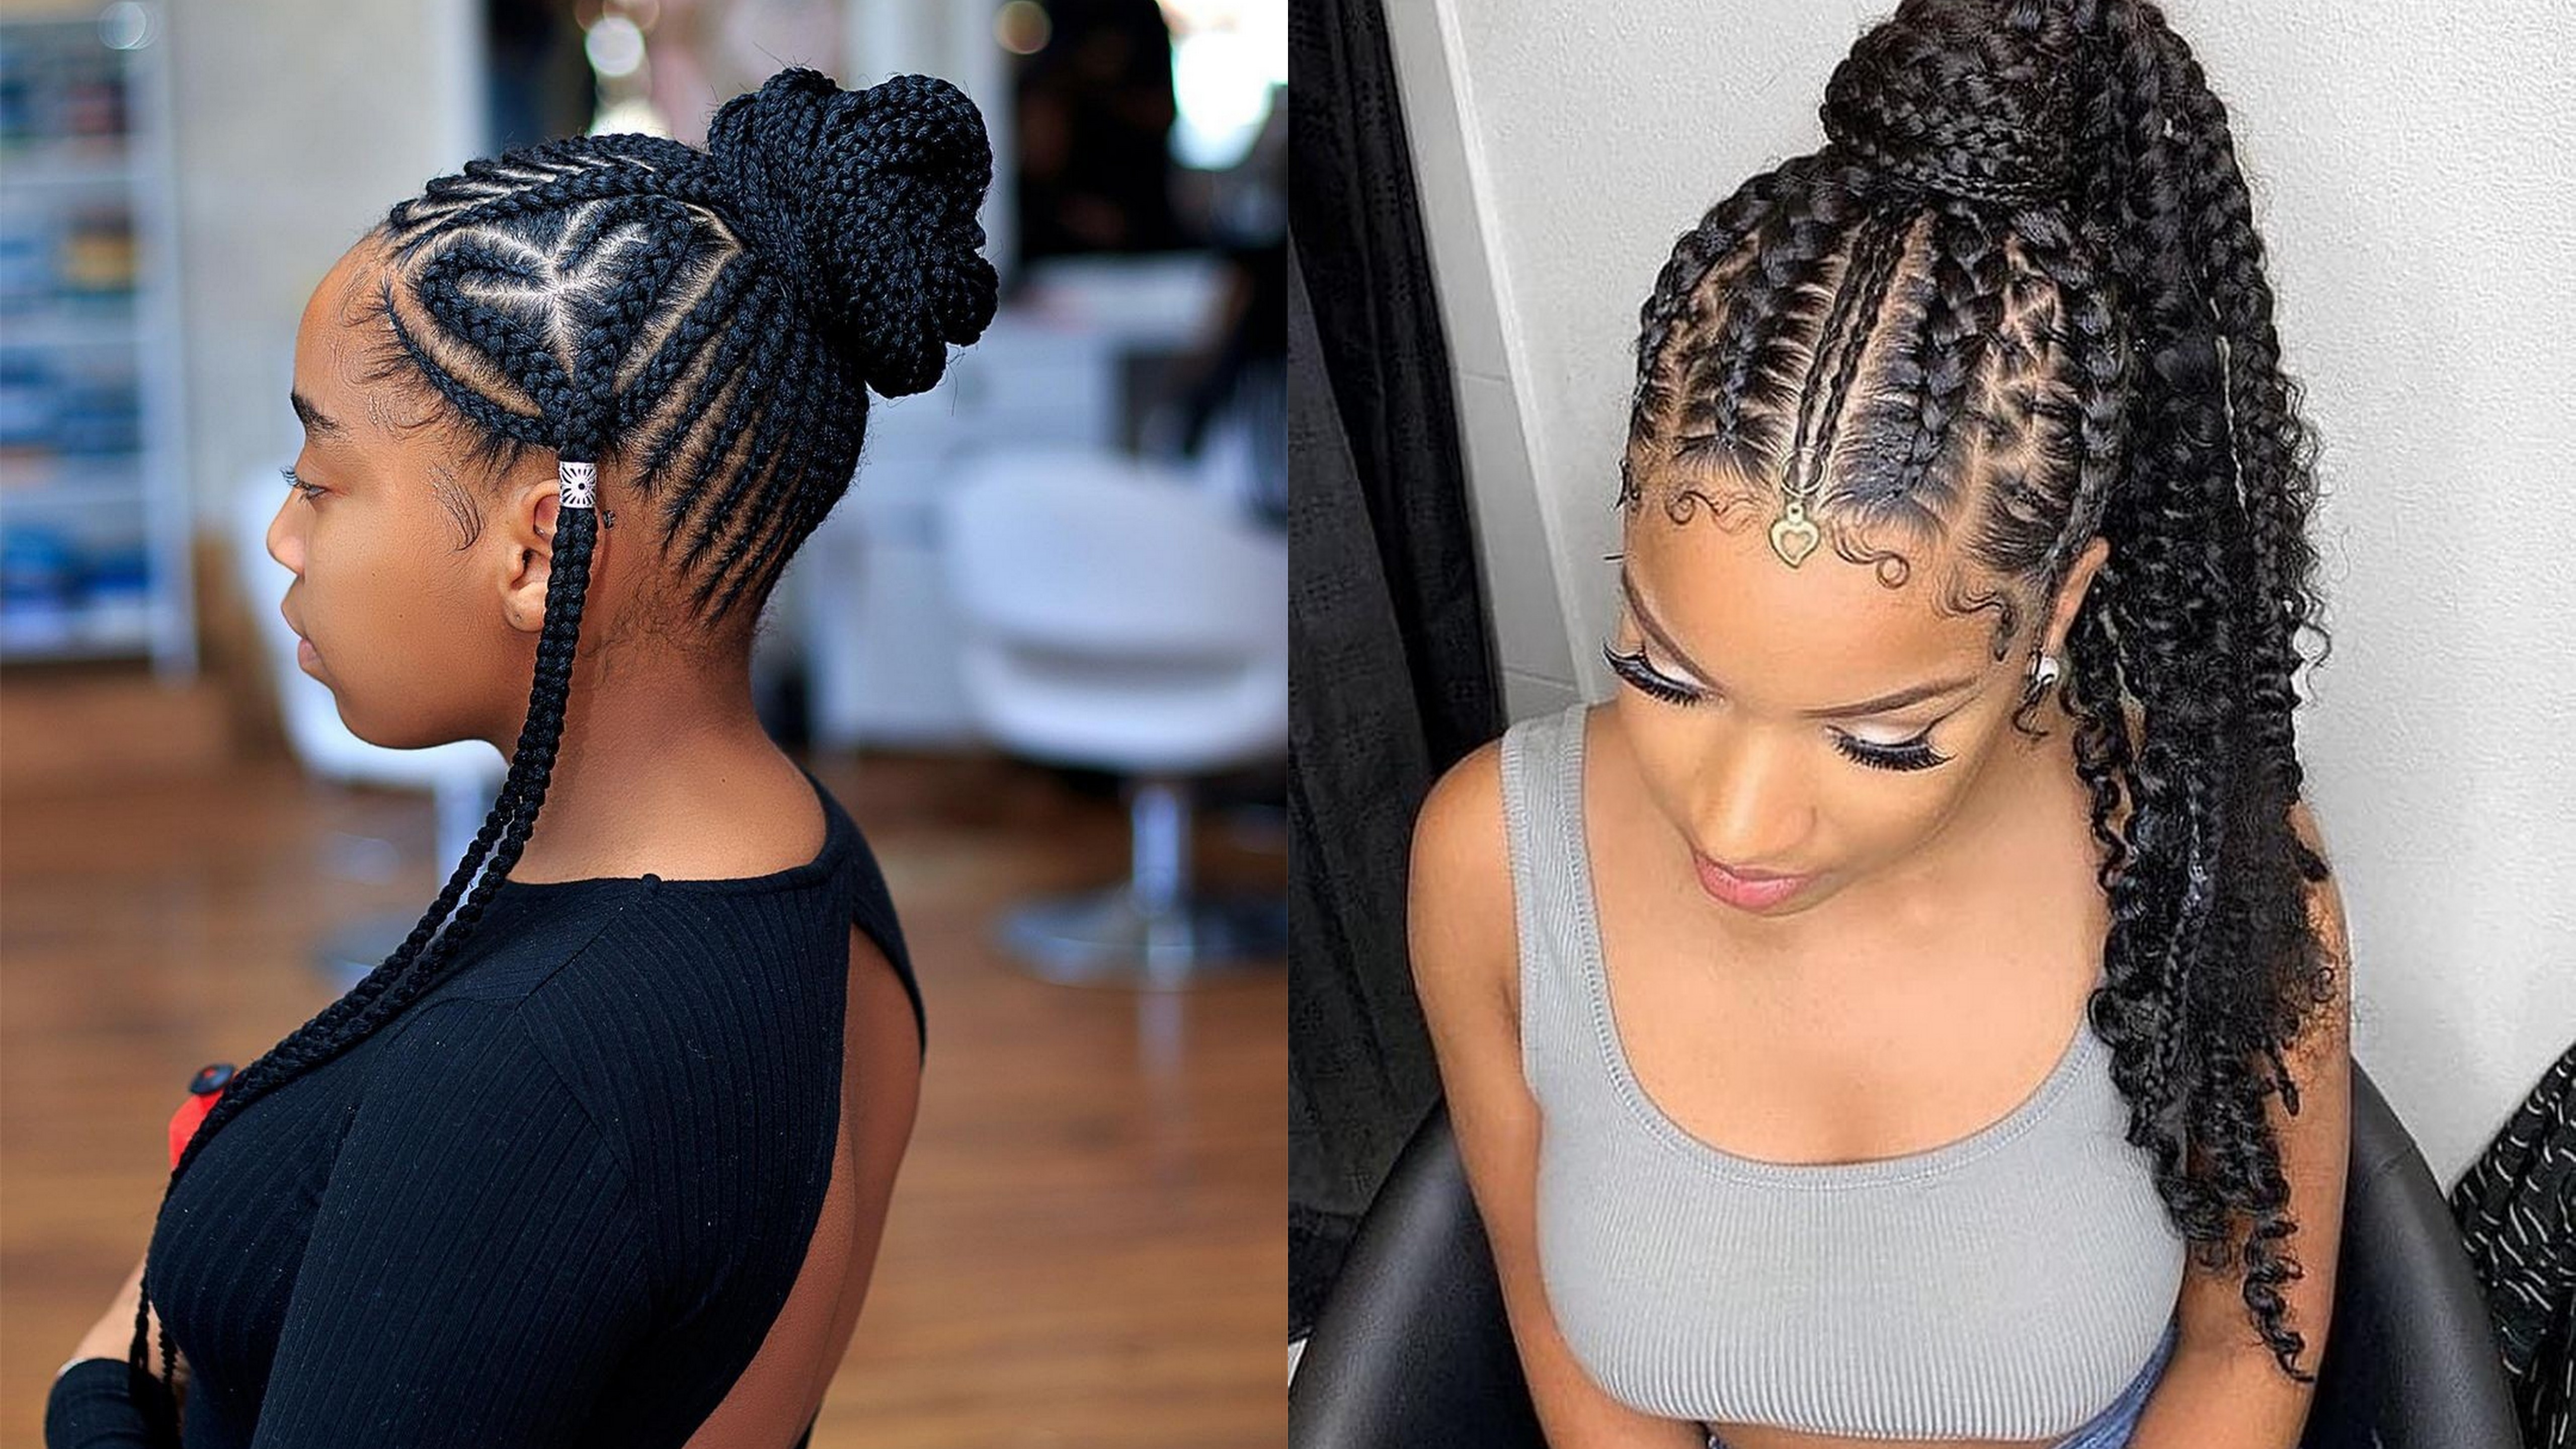 5 Trendy Hair Styles That Are Going To Make The Cut In 2023  GoodTimes  Lifestyle Food Travel Fashion Weddings Bollywood Tech Videos  Photos